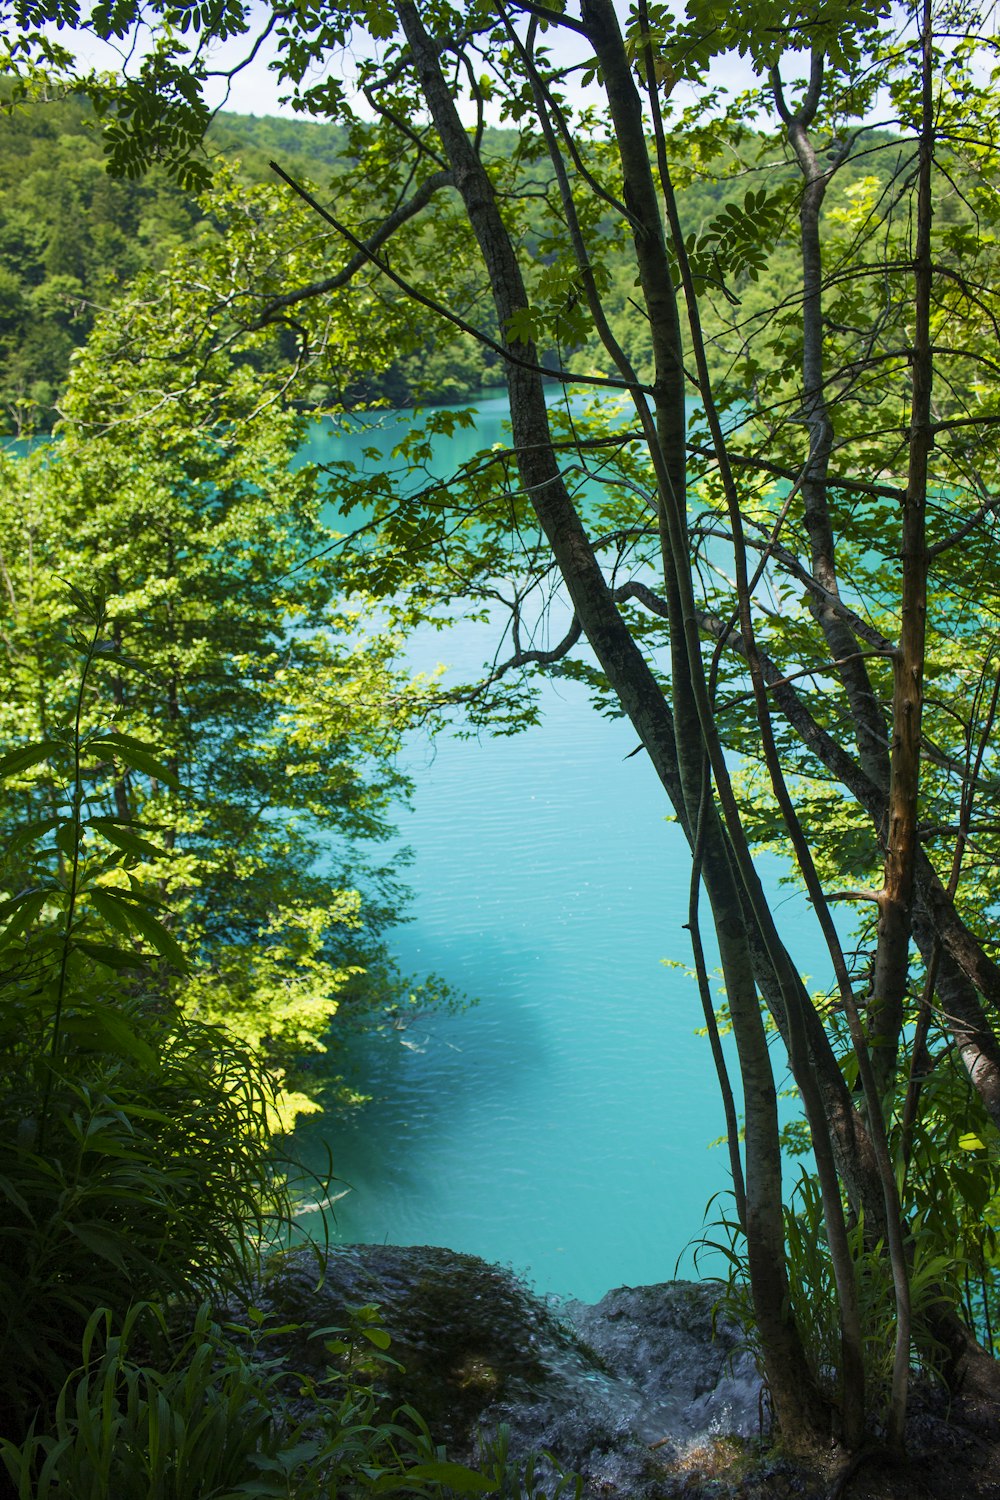 green trees beside blue body of water during daytime